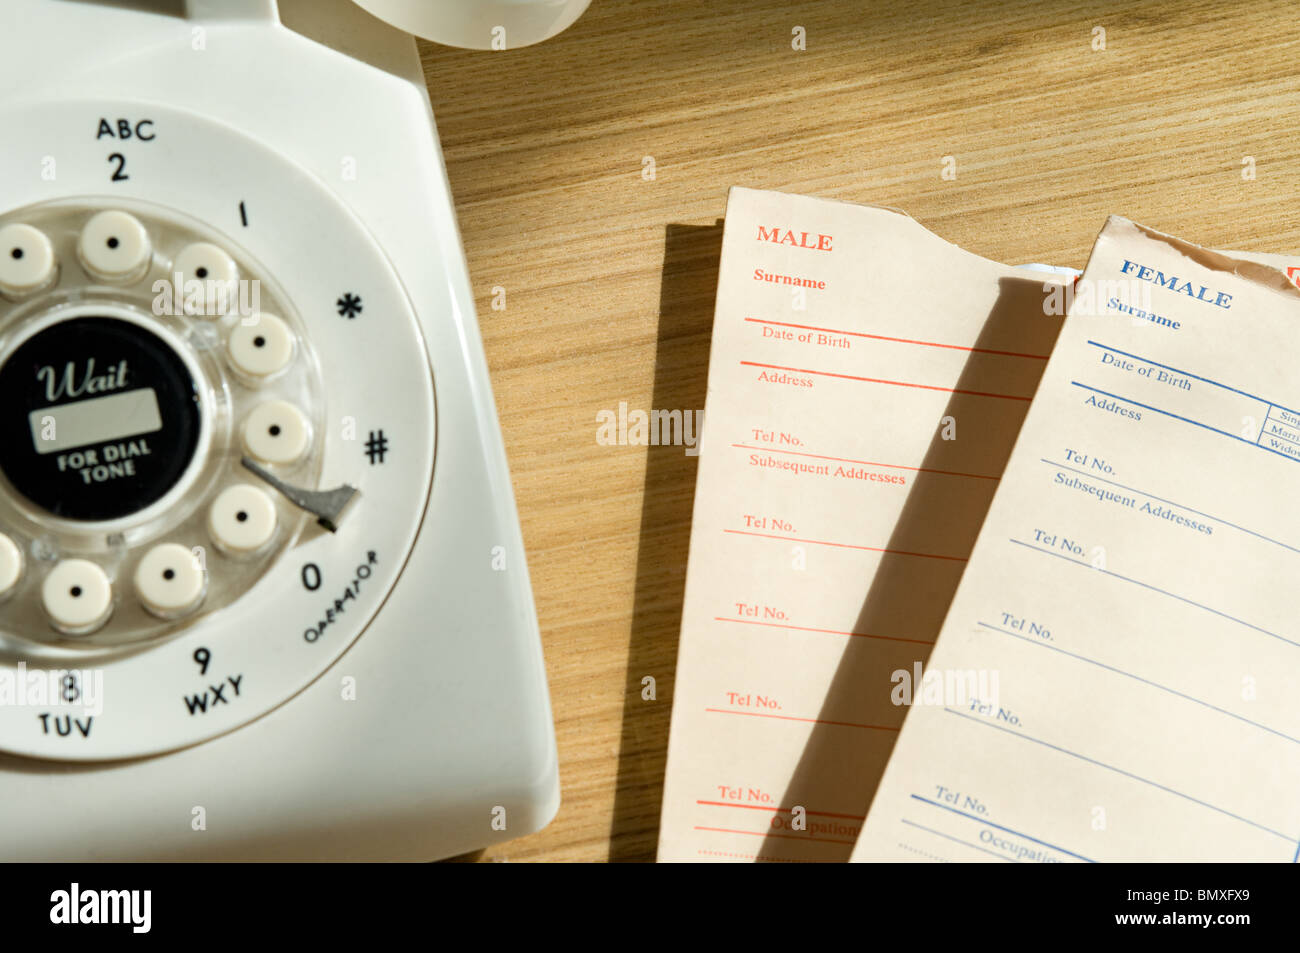 Telephone and medical records Stock Photo